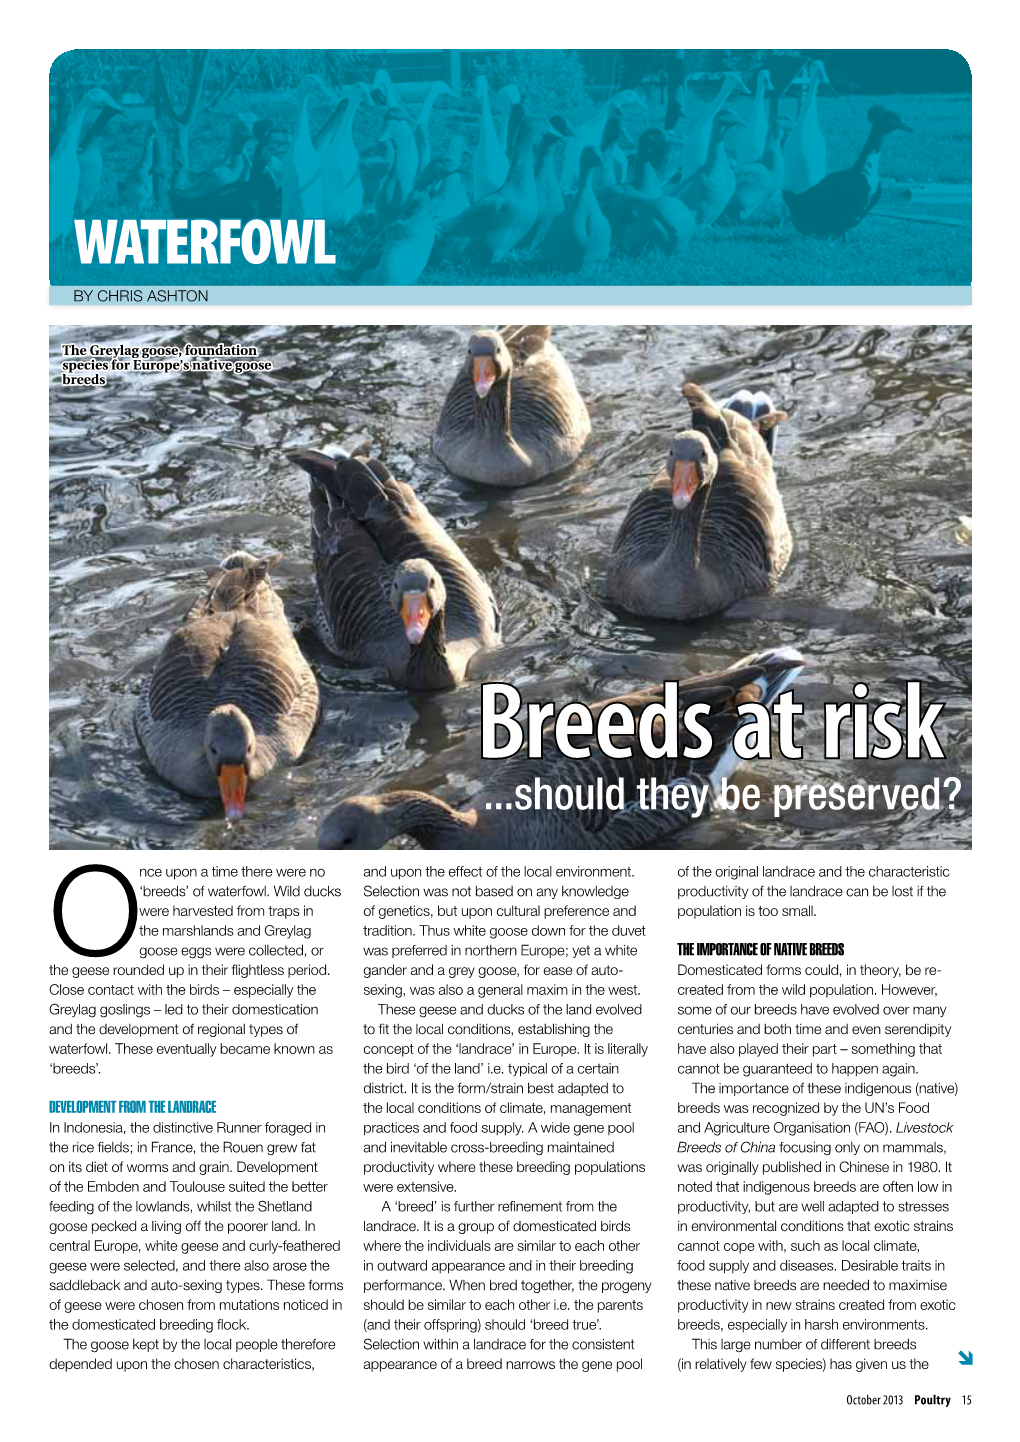 Waterfowl Breeds at Risk